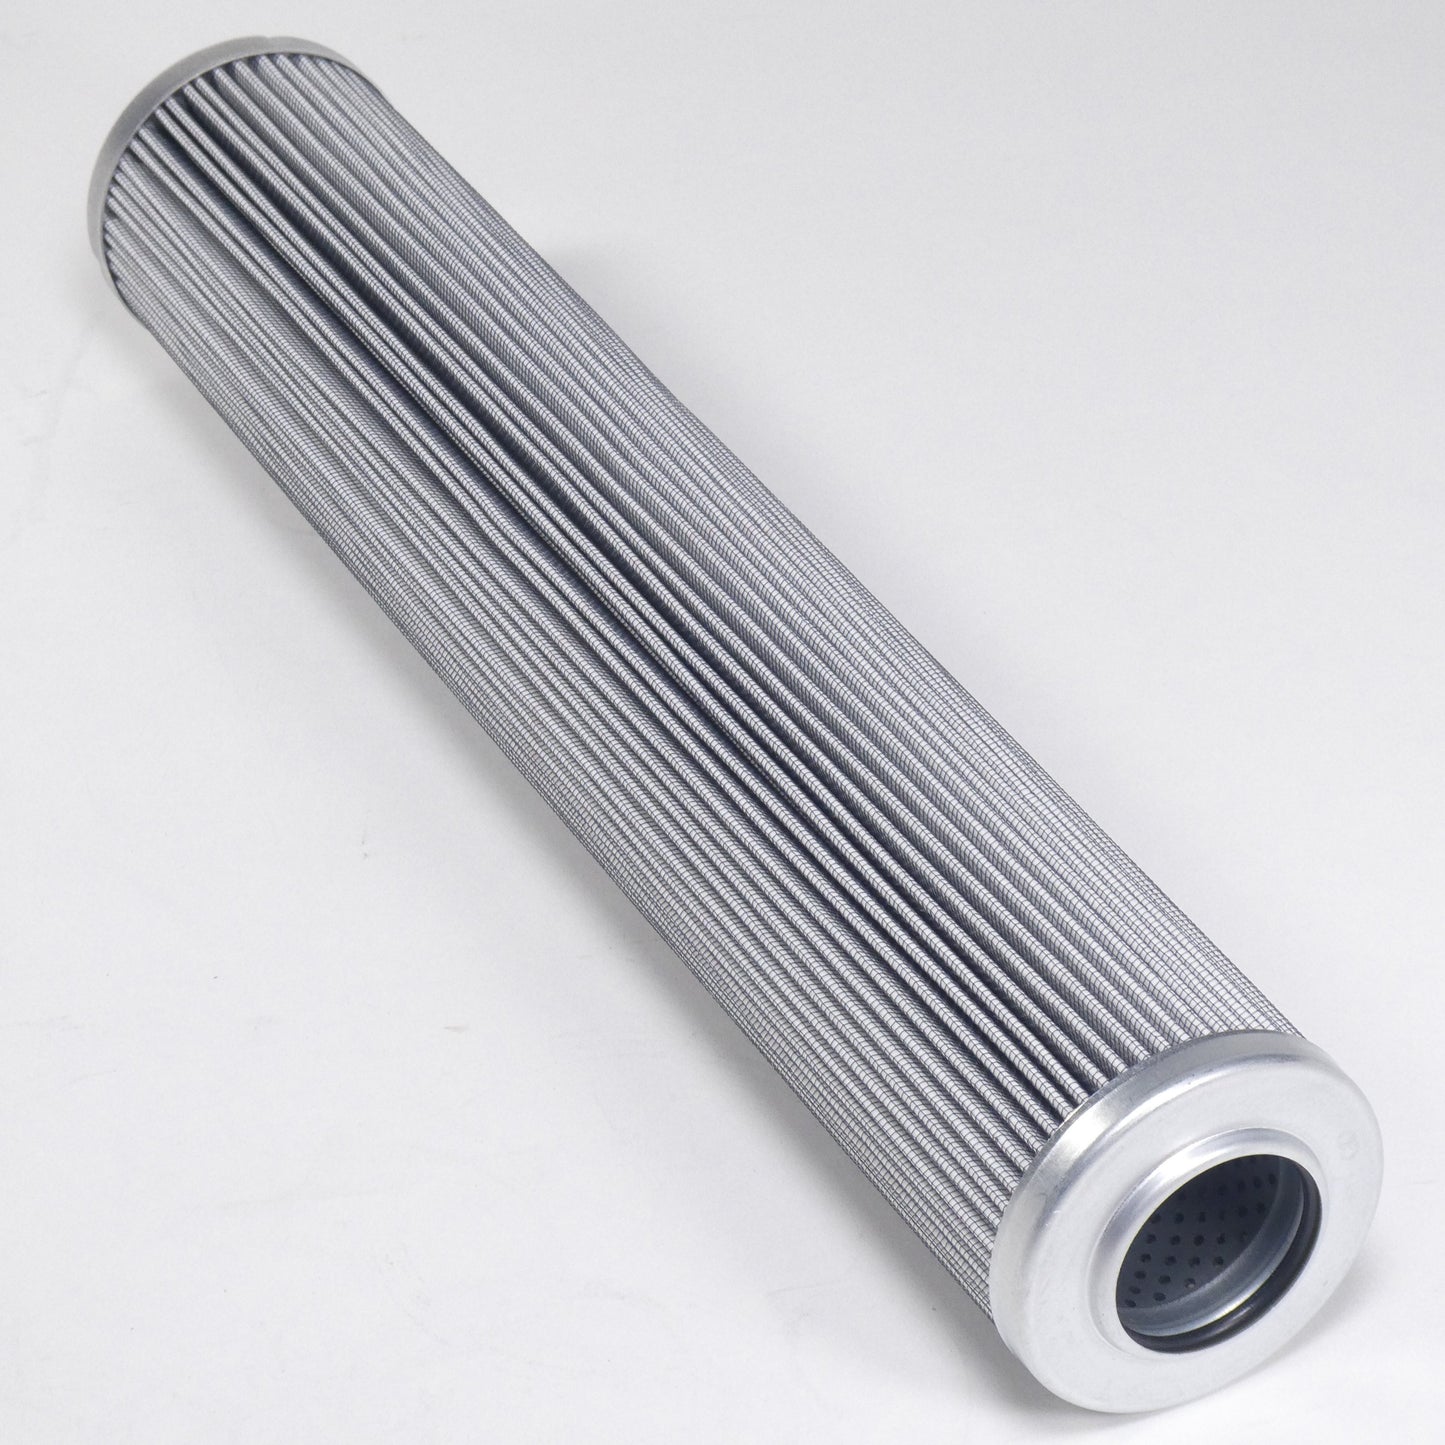 Hydrafil Replacement Filter Element for Pall HC9600FKZ16Z